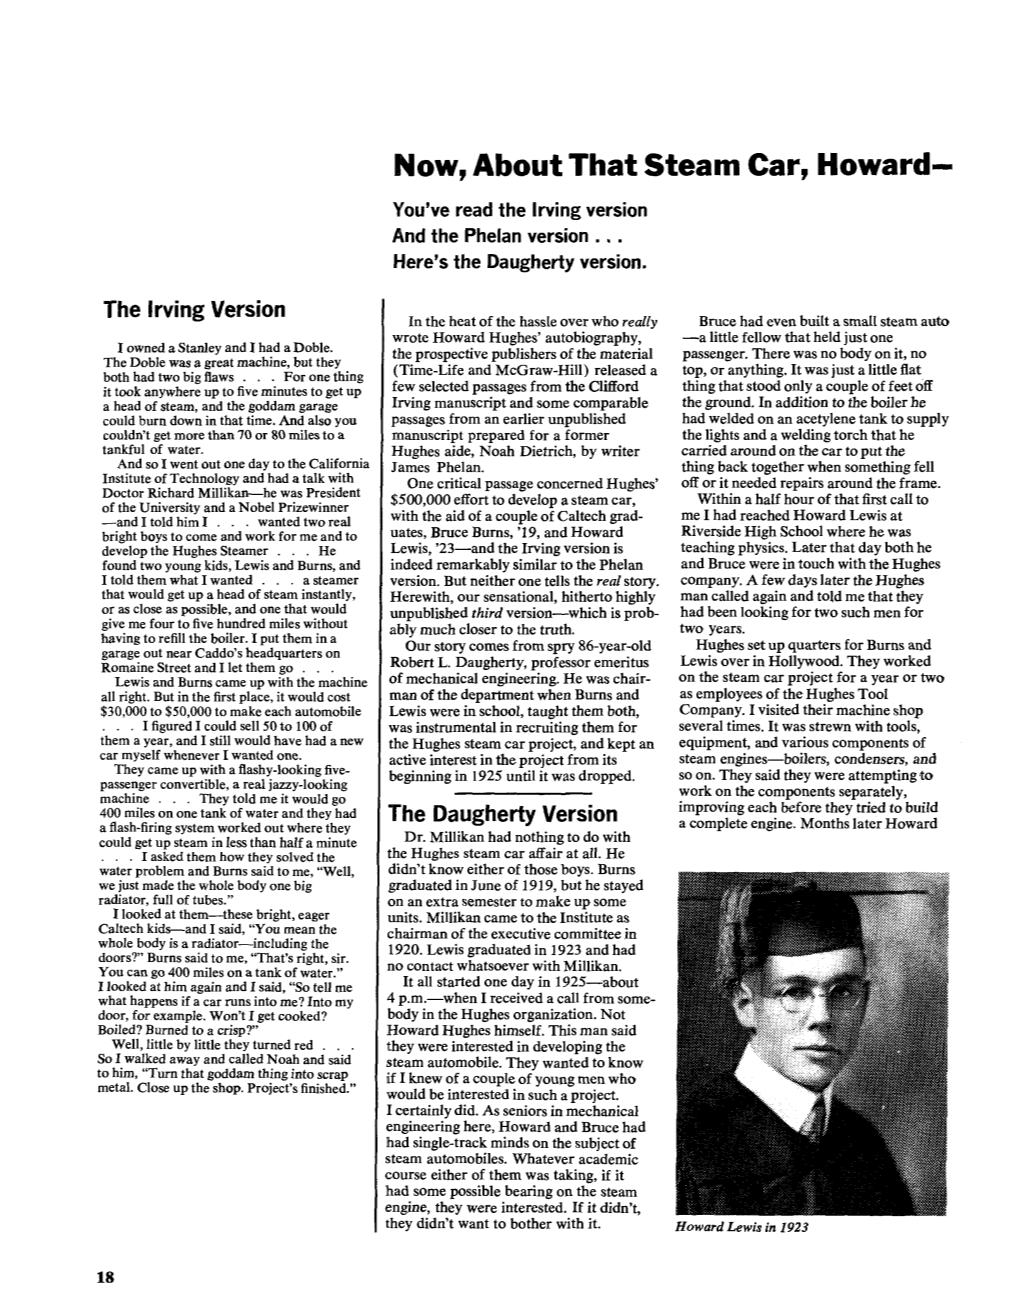 Now, About That Steam Car, Howard- You've Read the Irving Version and the Phelan Version